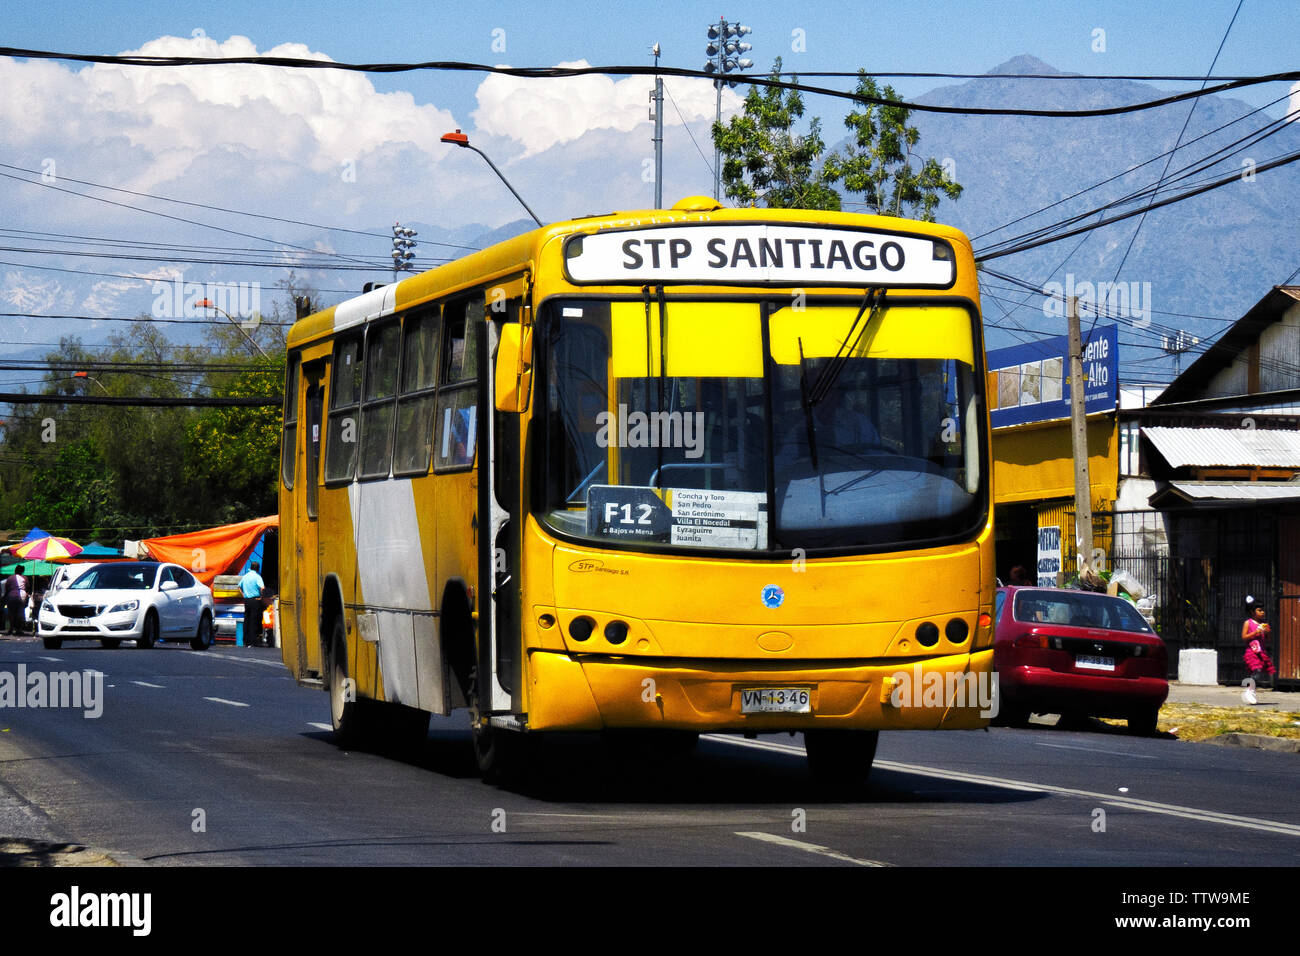 SANTIAGO, CHILE - NOVEMBER 2014: An old bus from the Transantiago system at Puente Alto Stock Photo